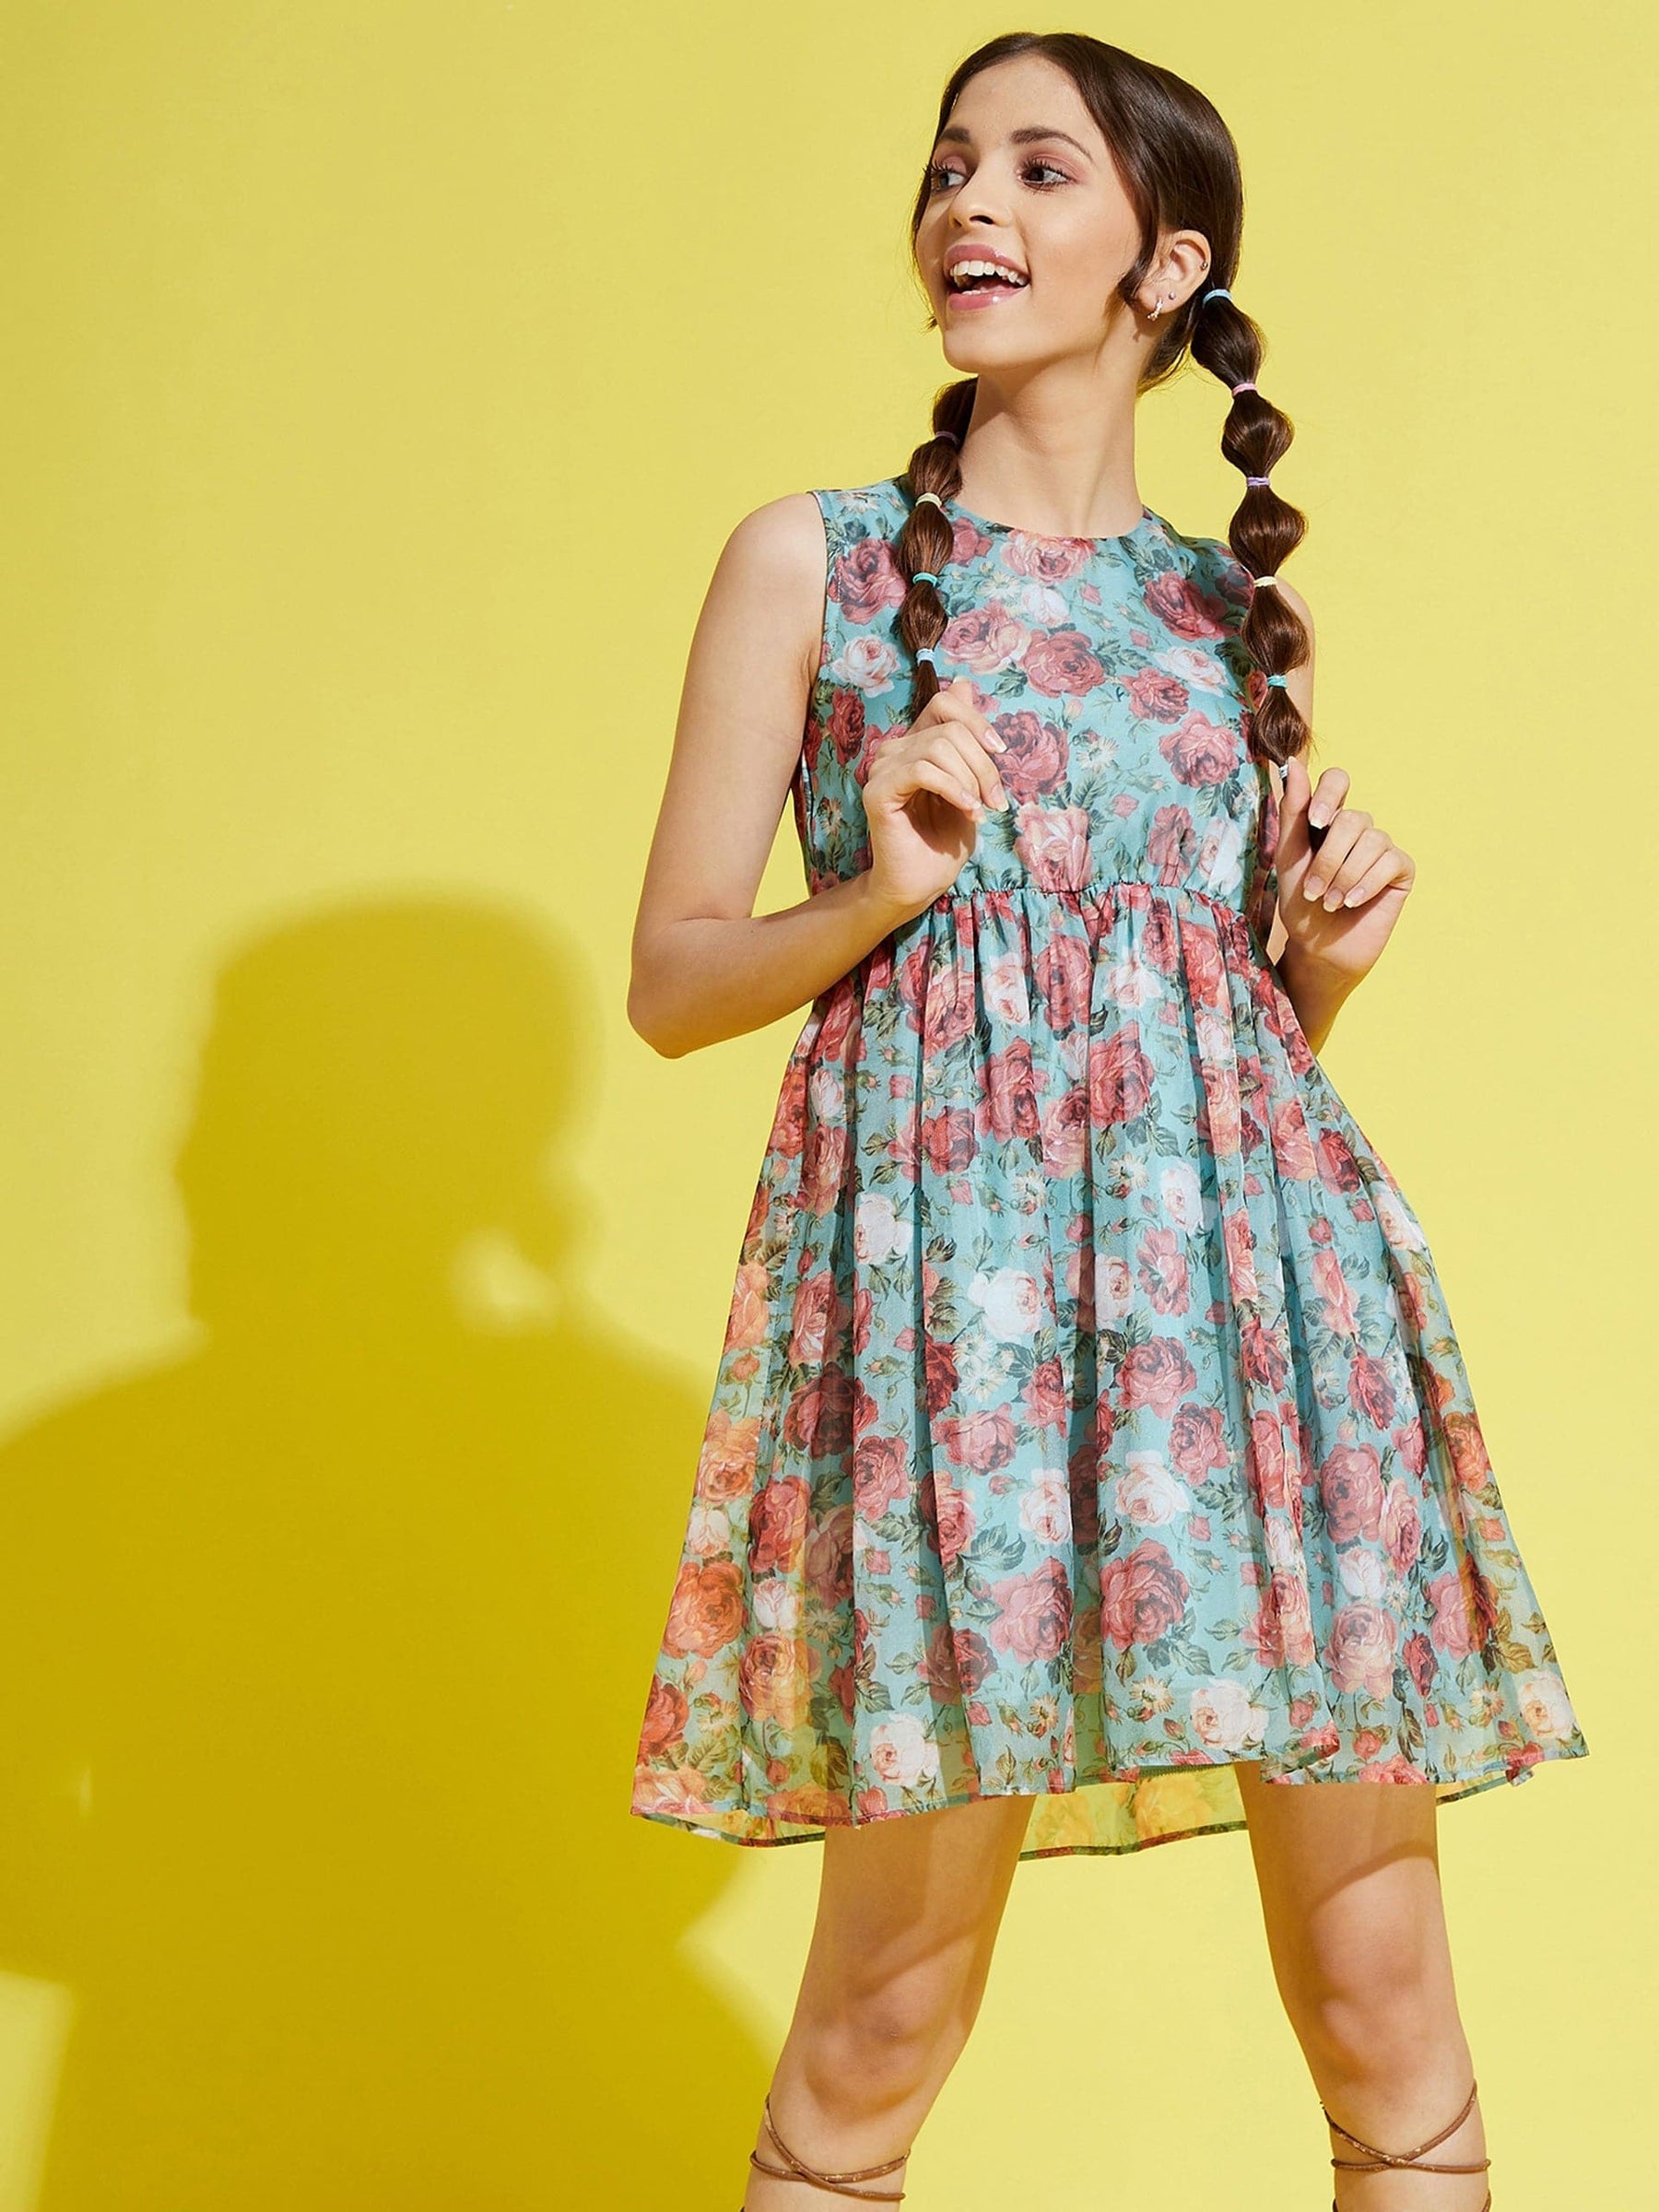 Floral Dresses For Women - Buy Floral Dresses For Women online in India